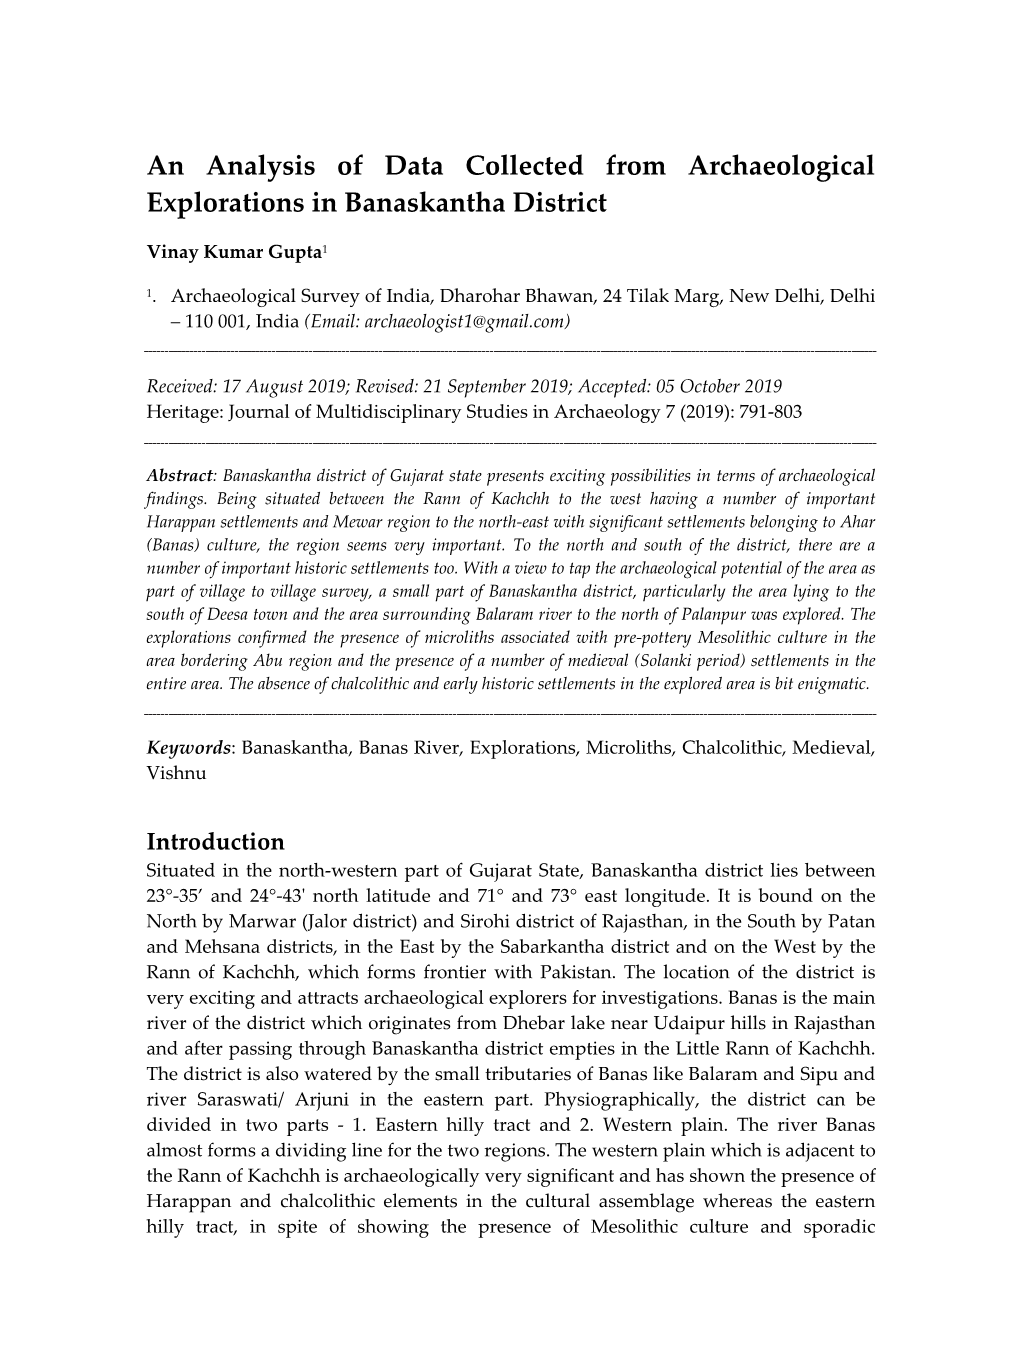 An Analysis of Data Collected from Archaeological Explorations in Banaskantha District